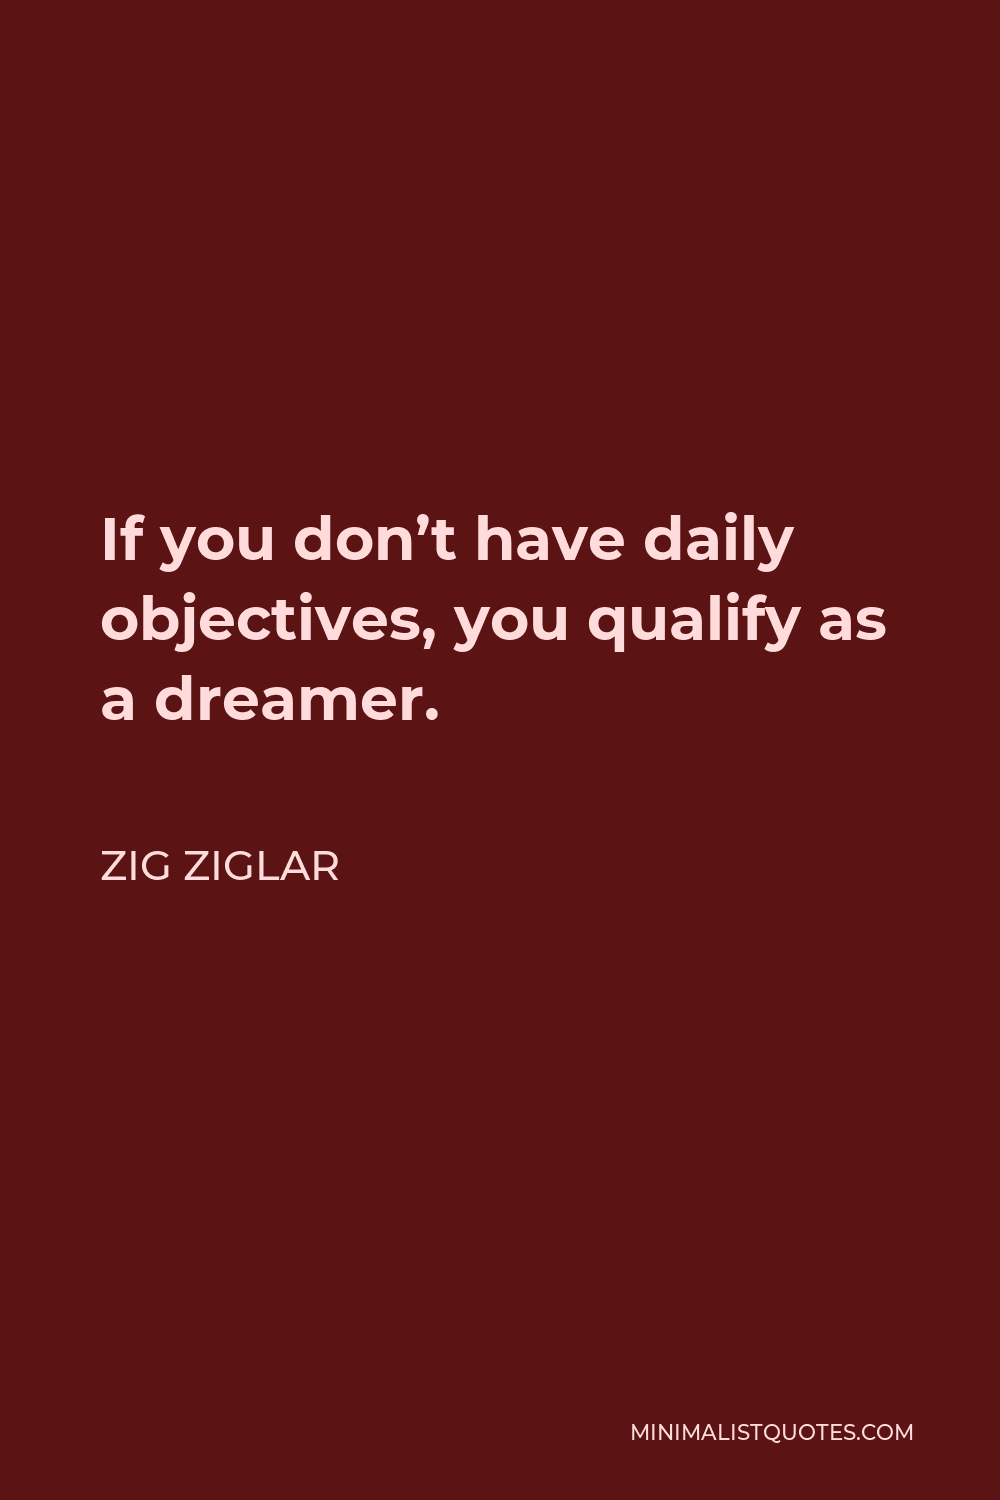 Zig Ziglar Quote - If you don’t have daily objectives, you qualify as a dreamer.